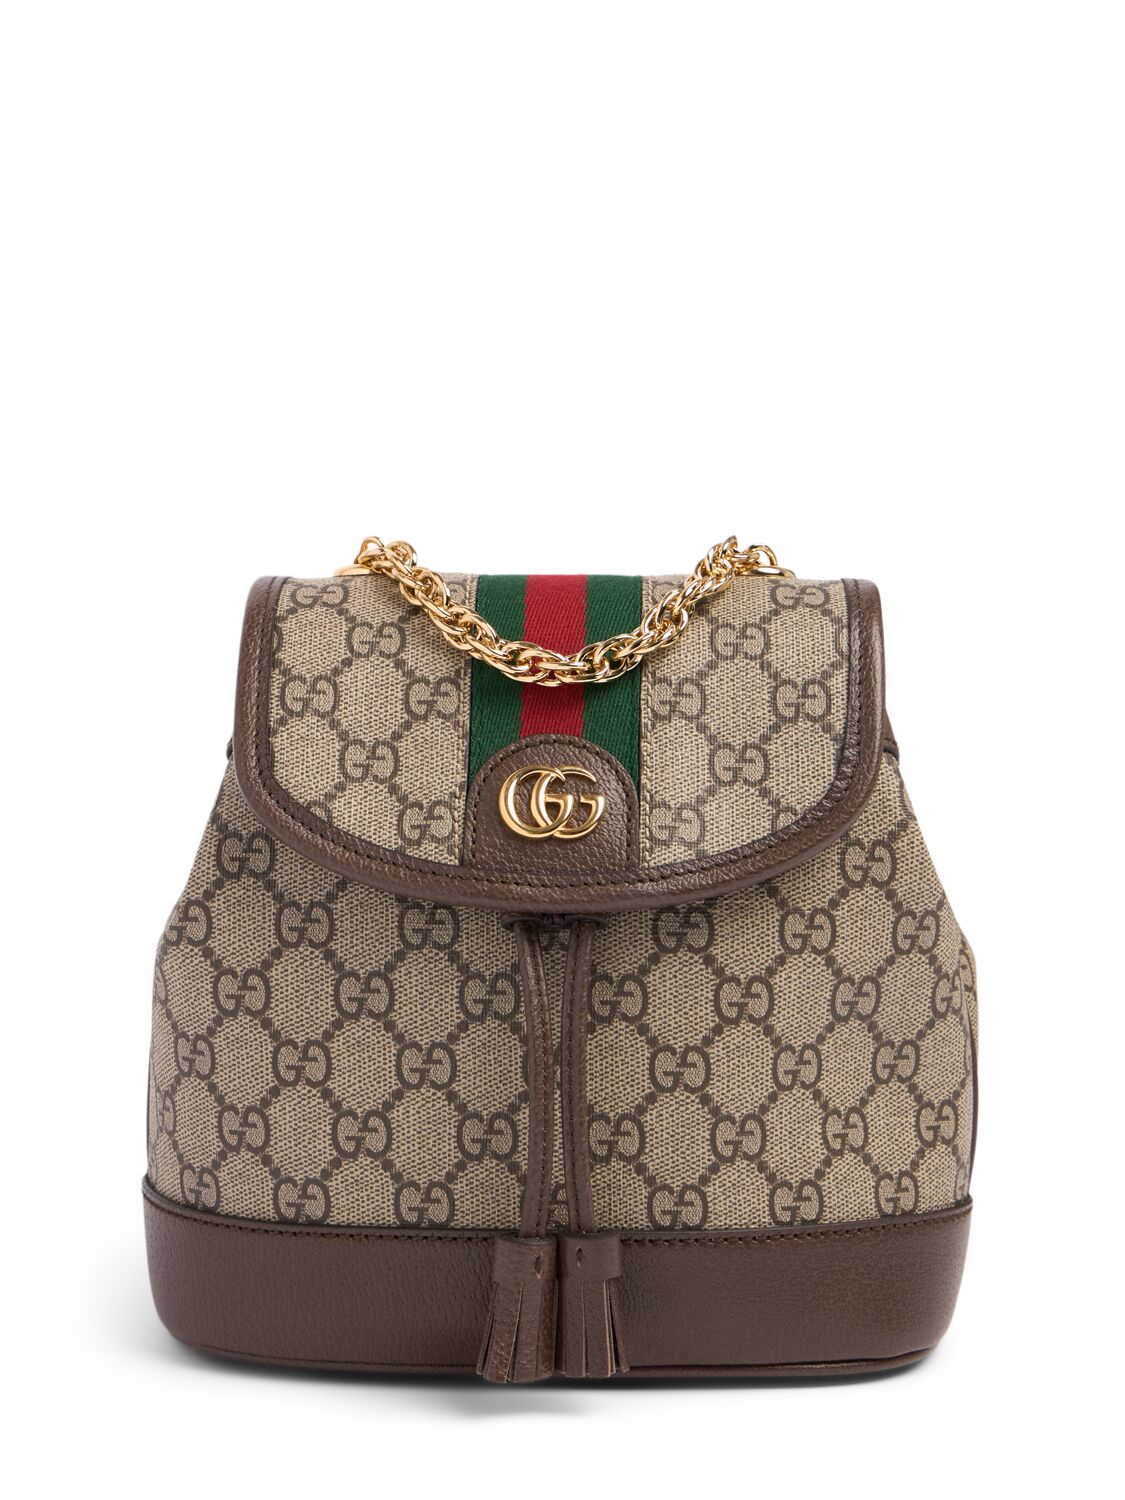 Gucci Ophidia Canvas Backpack In Beige,ebony